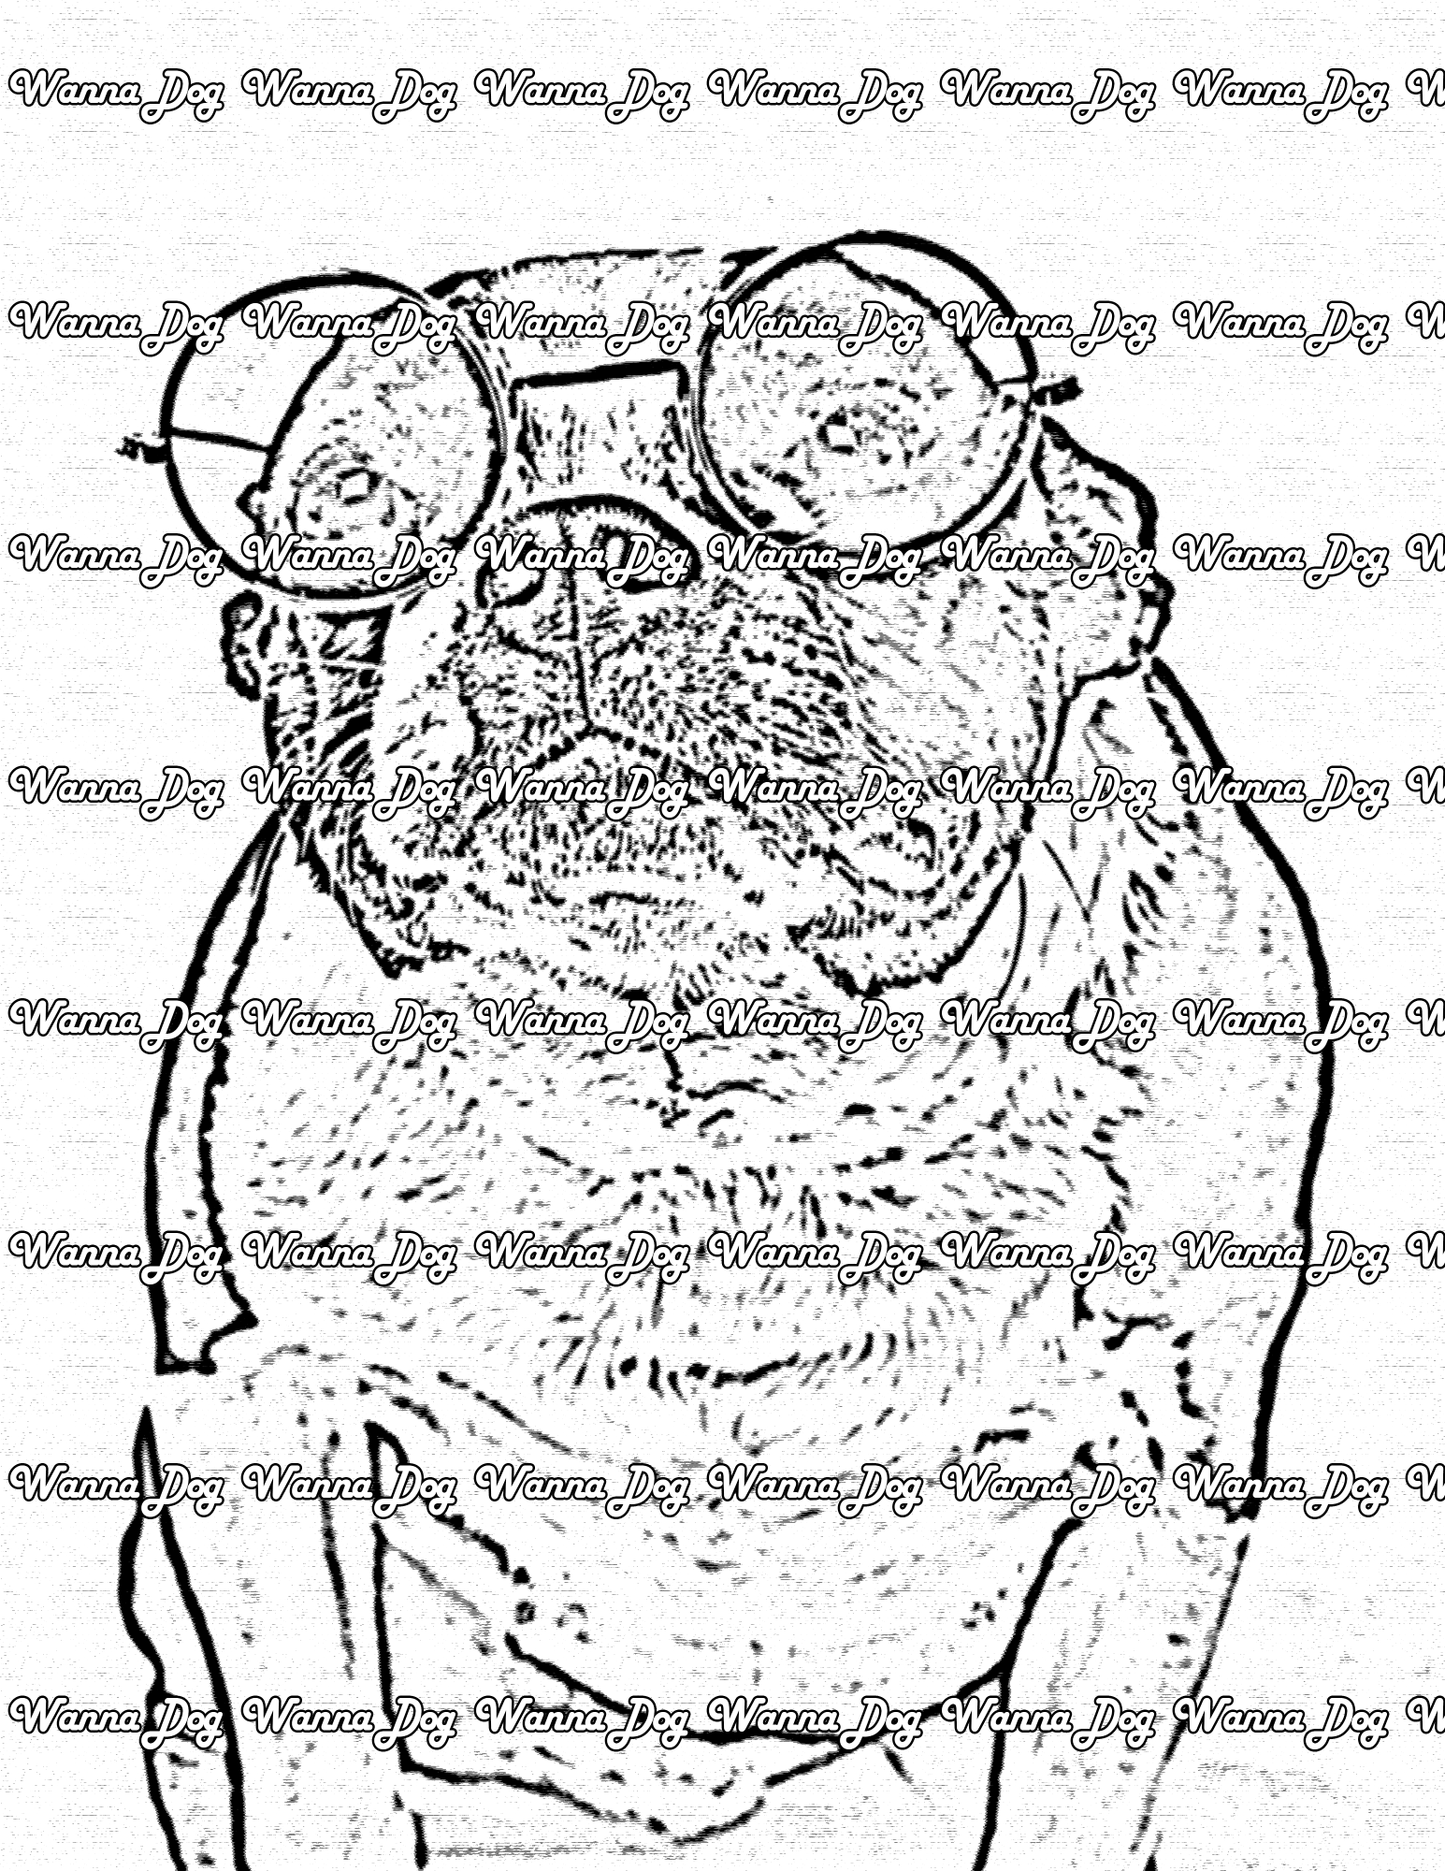 Boston Terrier Coloring Page of a Boston Terrier wearing sunglasses